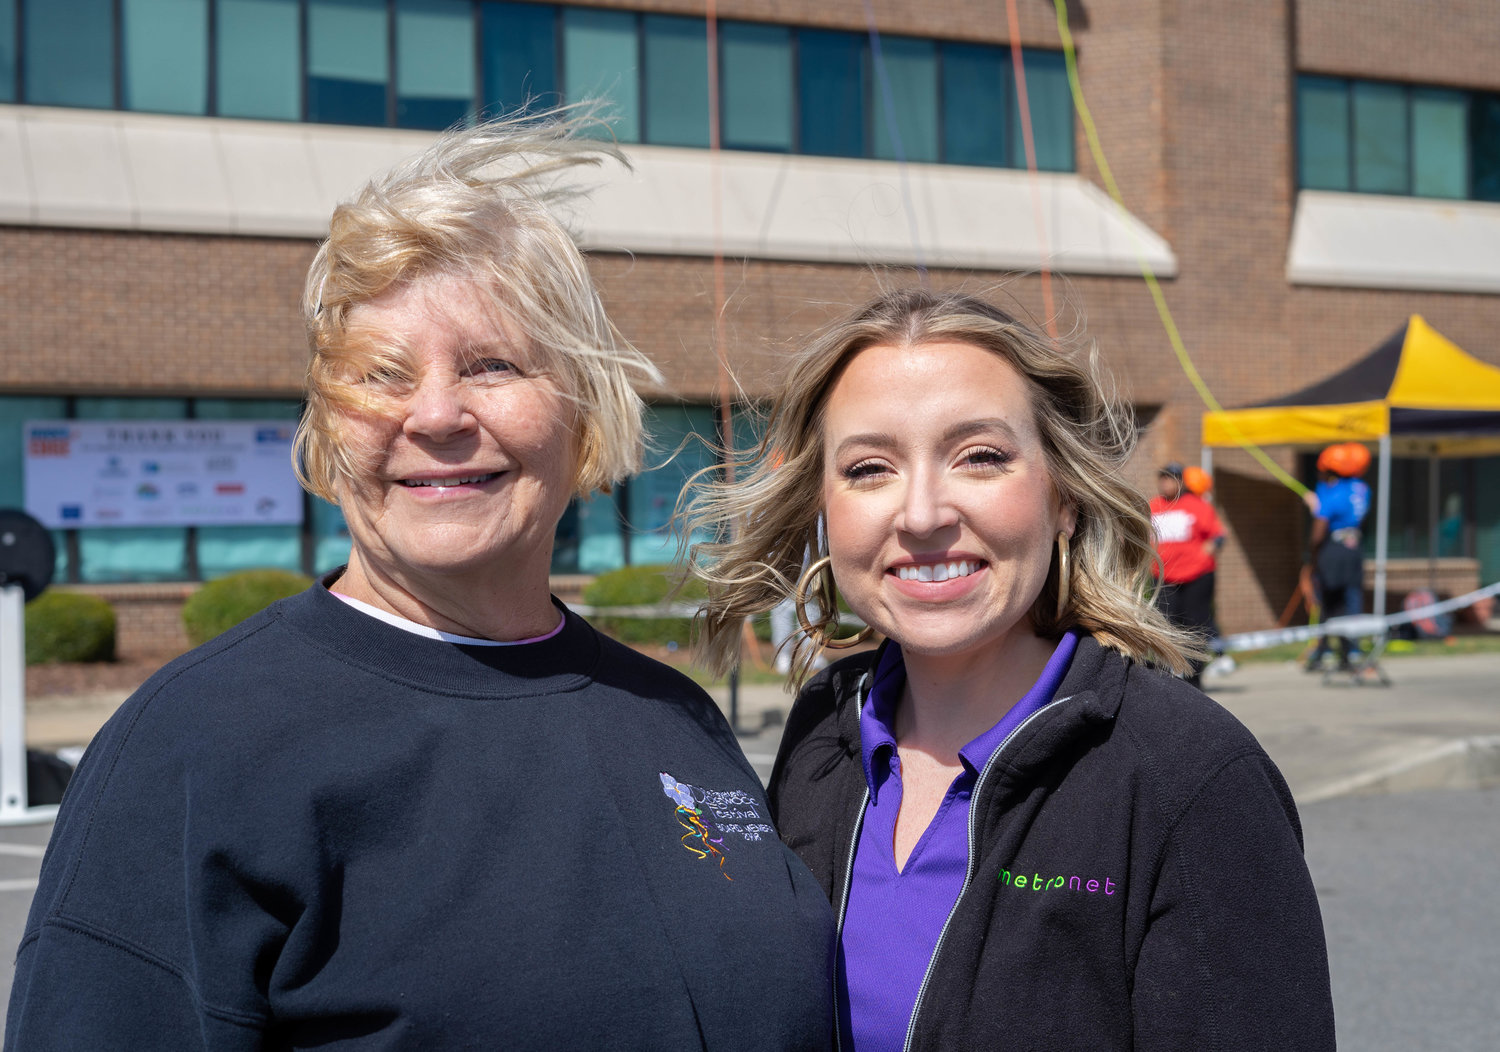 Jackie Tuckey and Sarah Pfeffer took part in Over the Edge.